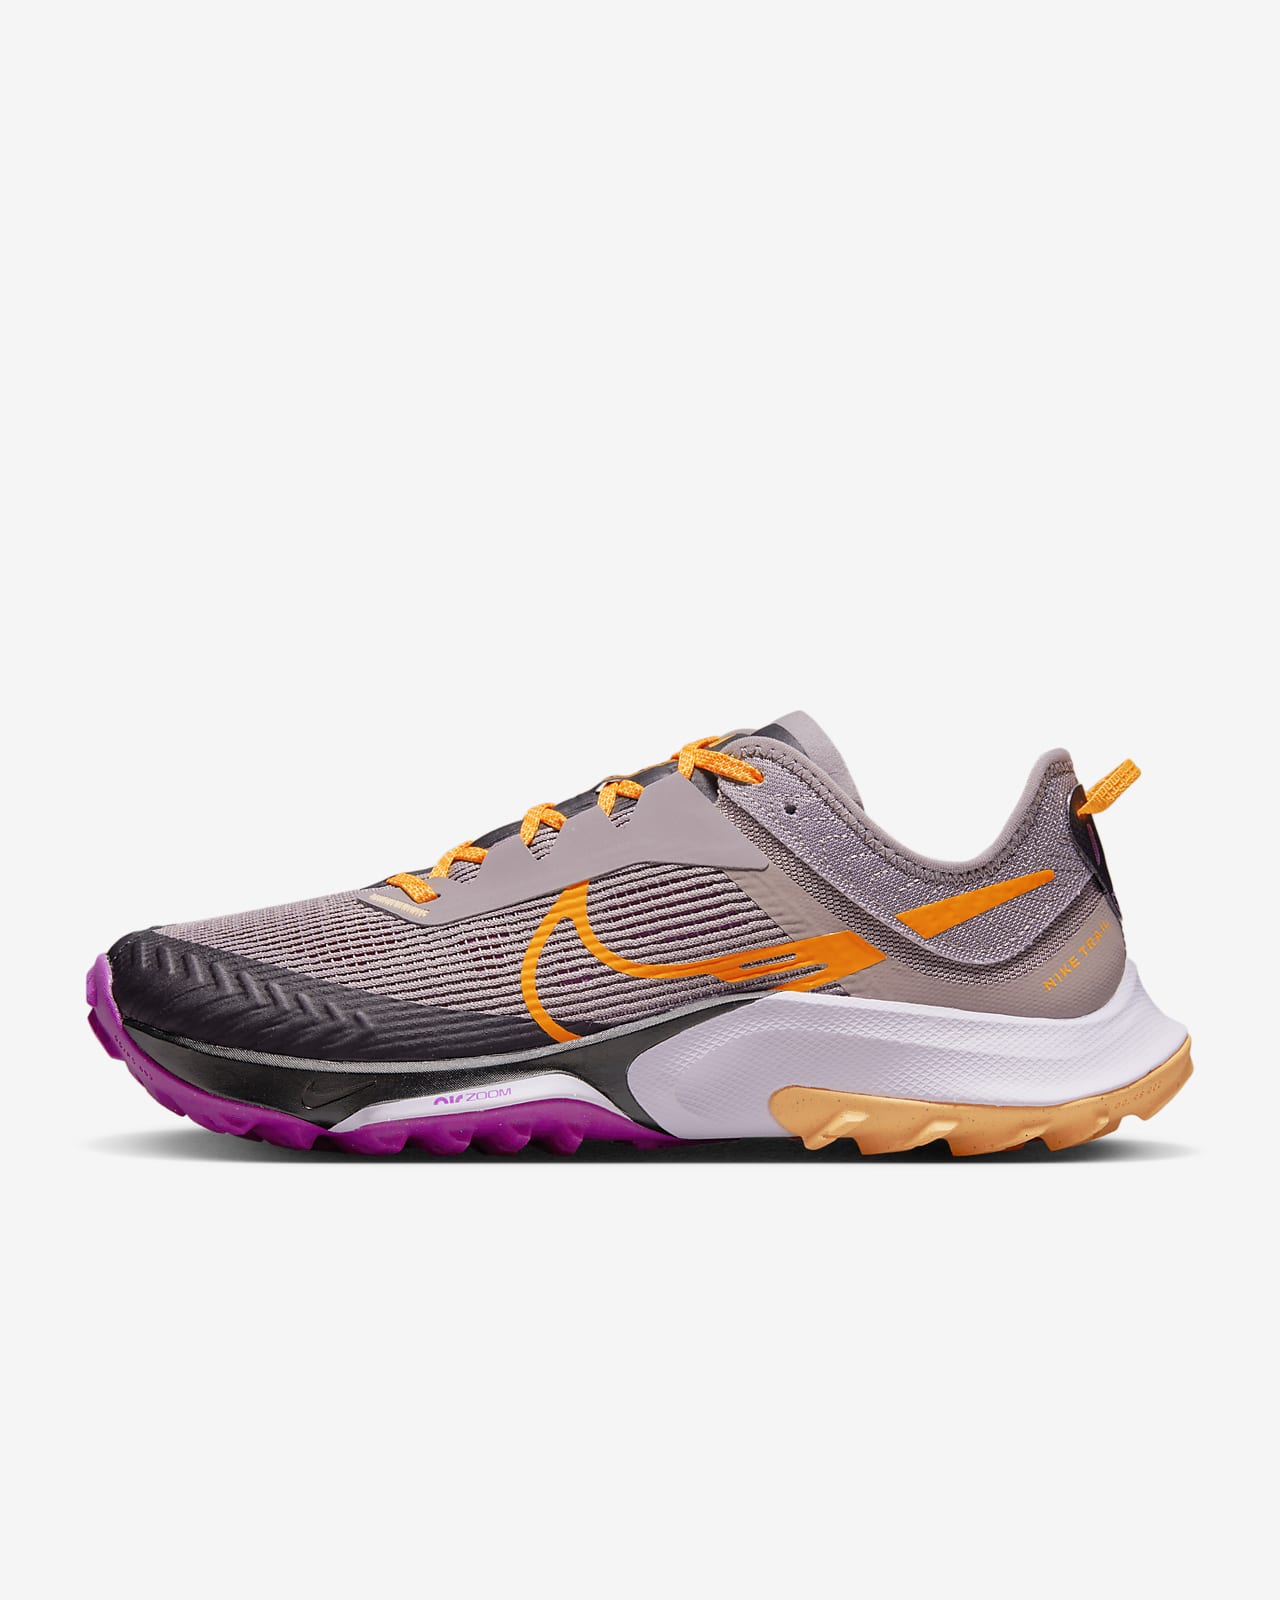 Nike Air Zoom Terra Kiger 8 Women's Trail Running Shoes